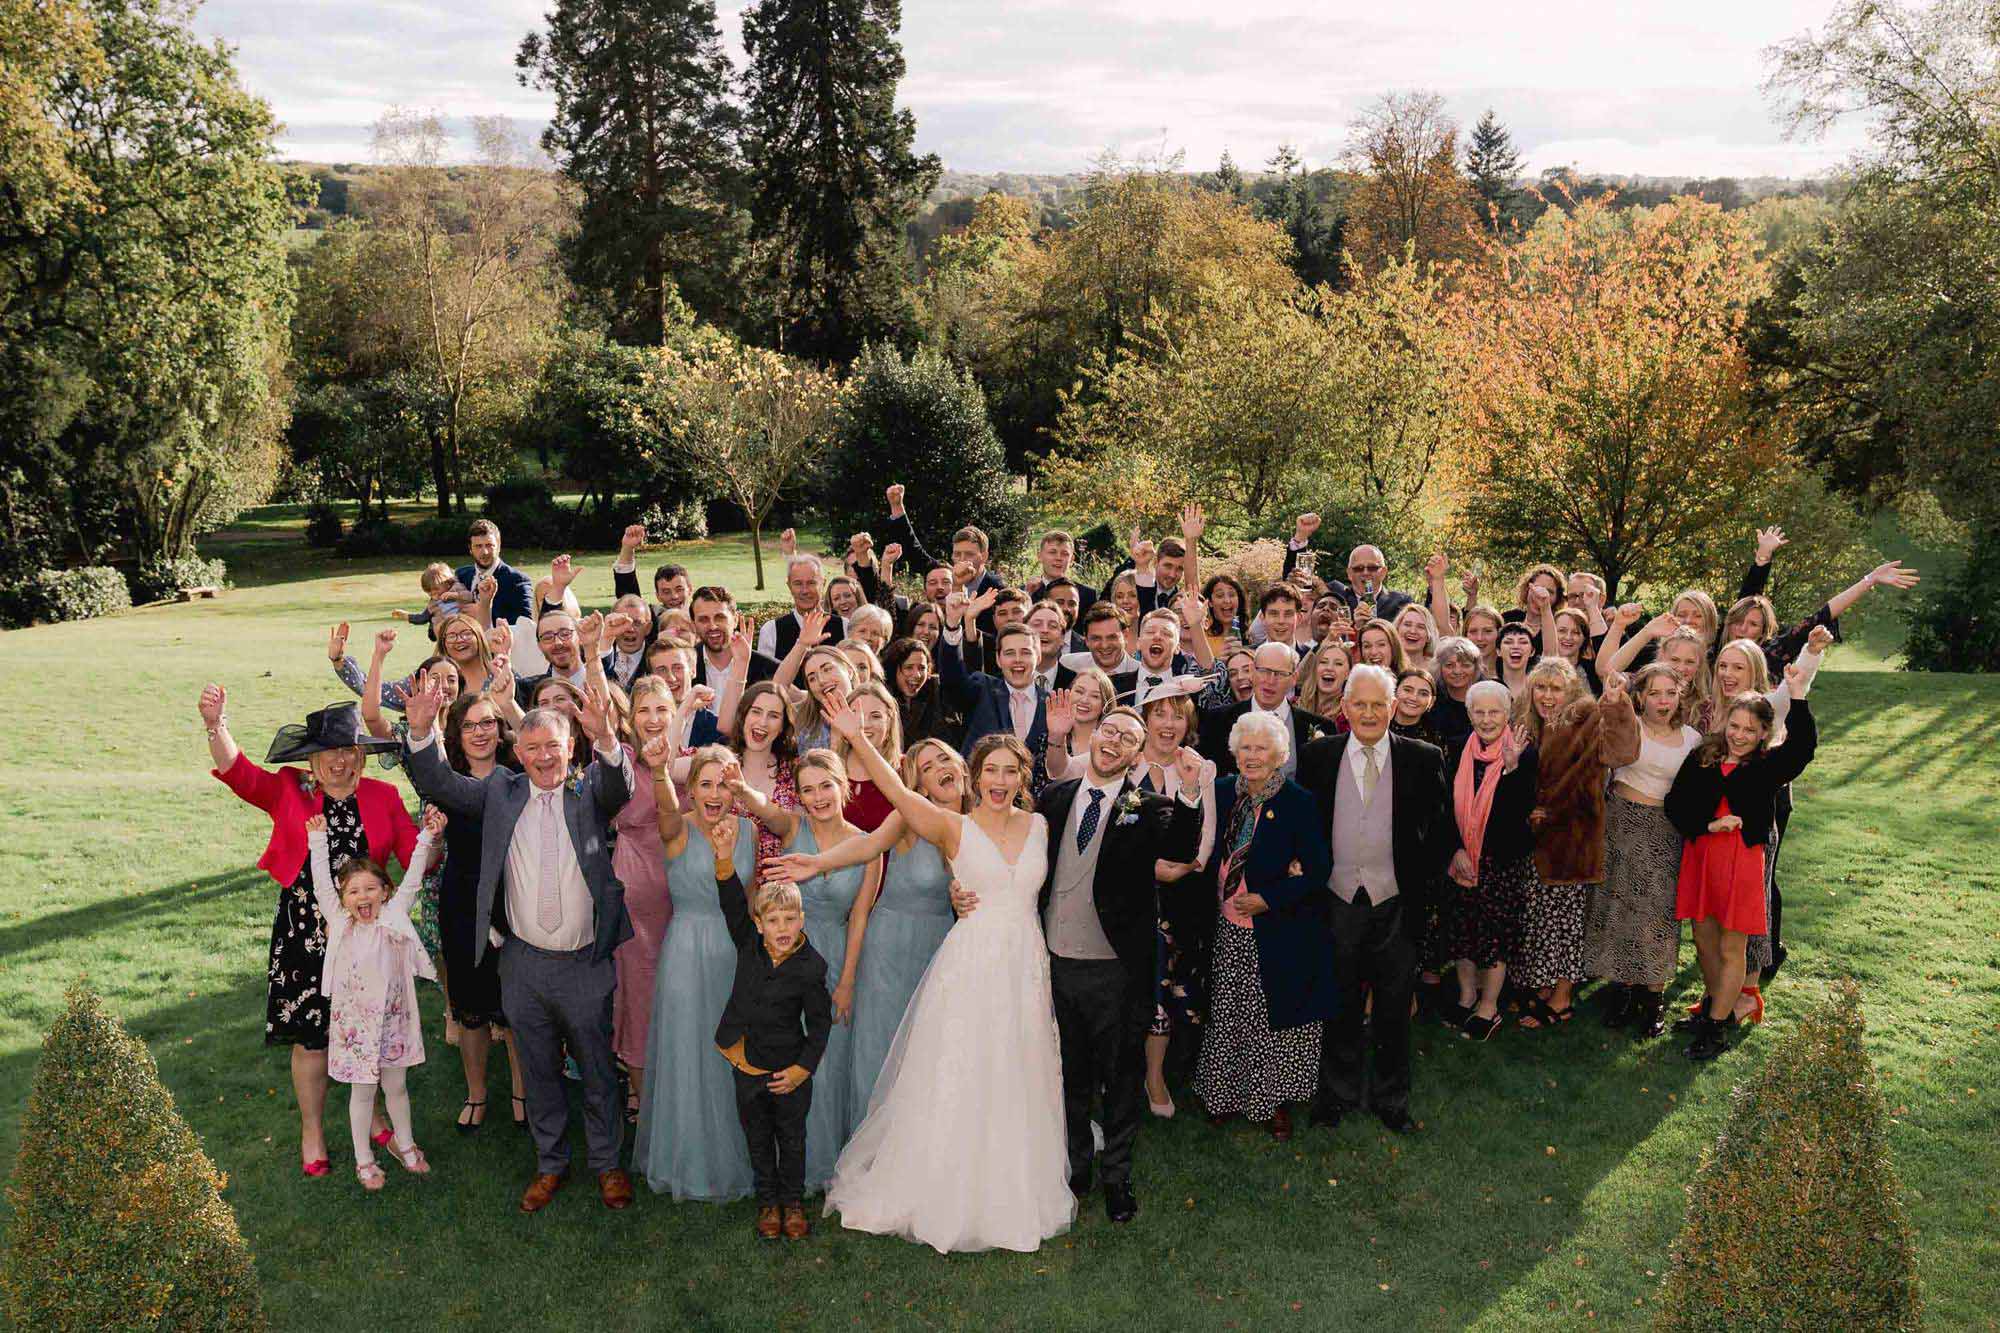 all the wedding guests cheer at Salomons Estate in Tunbridge Wells.